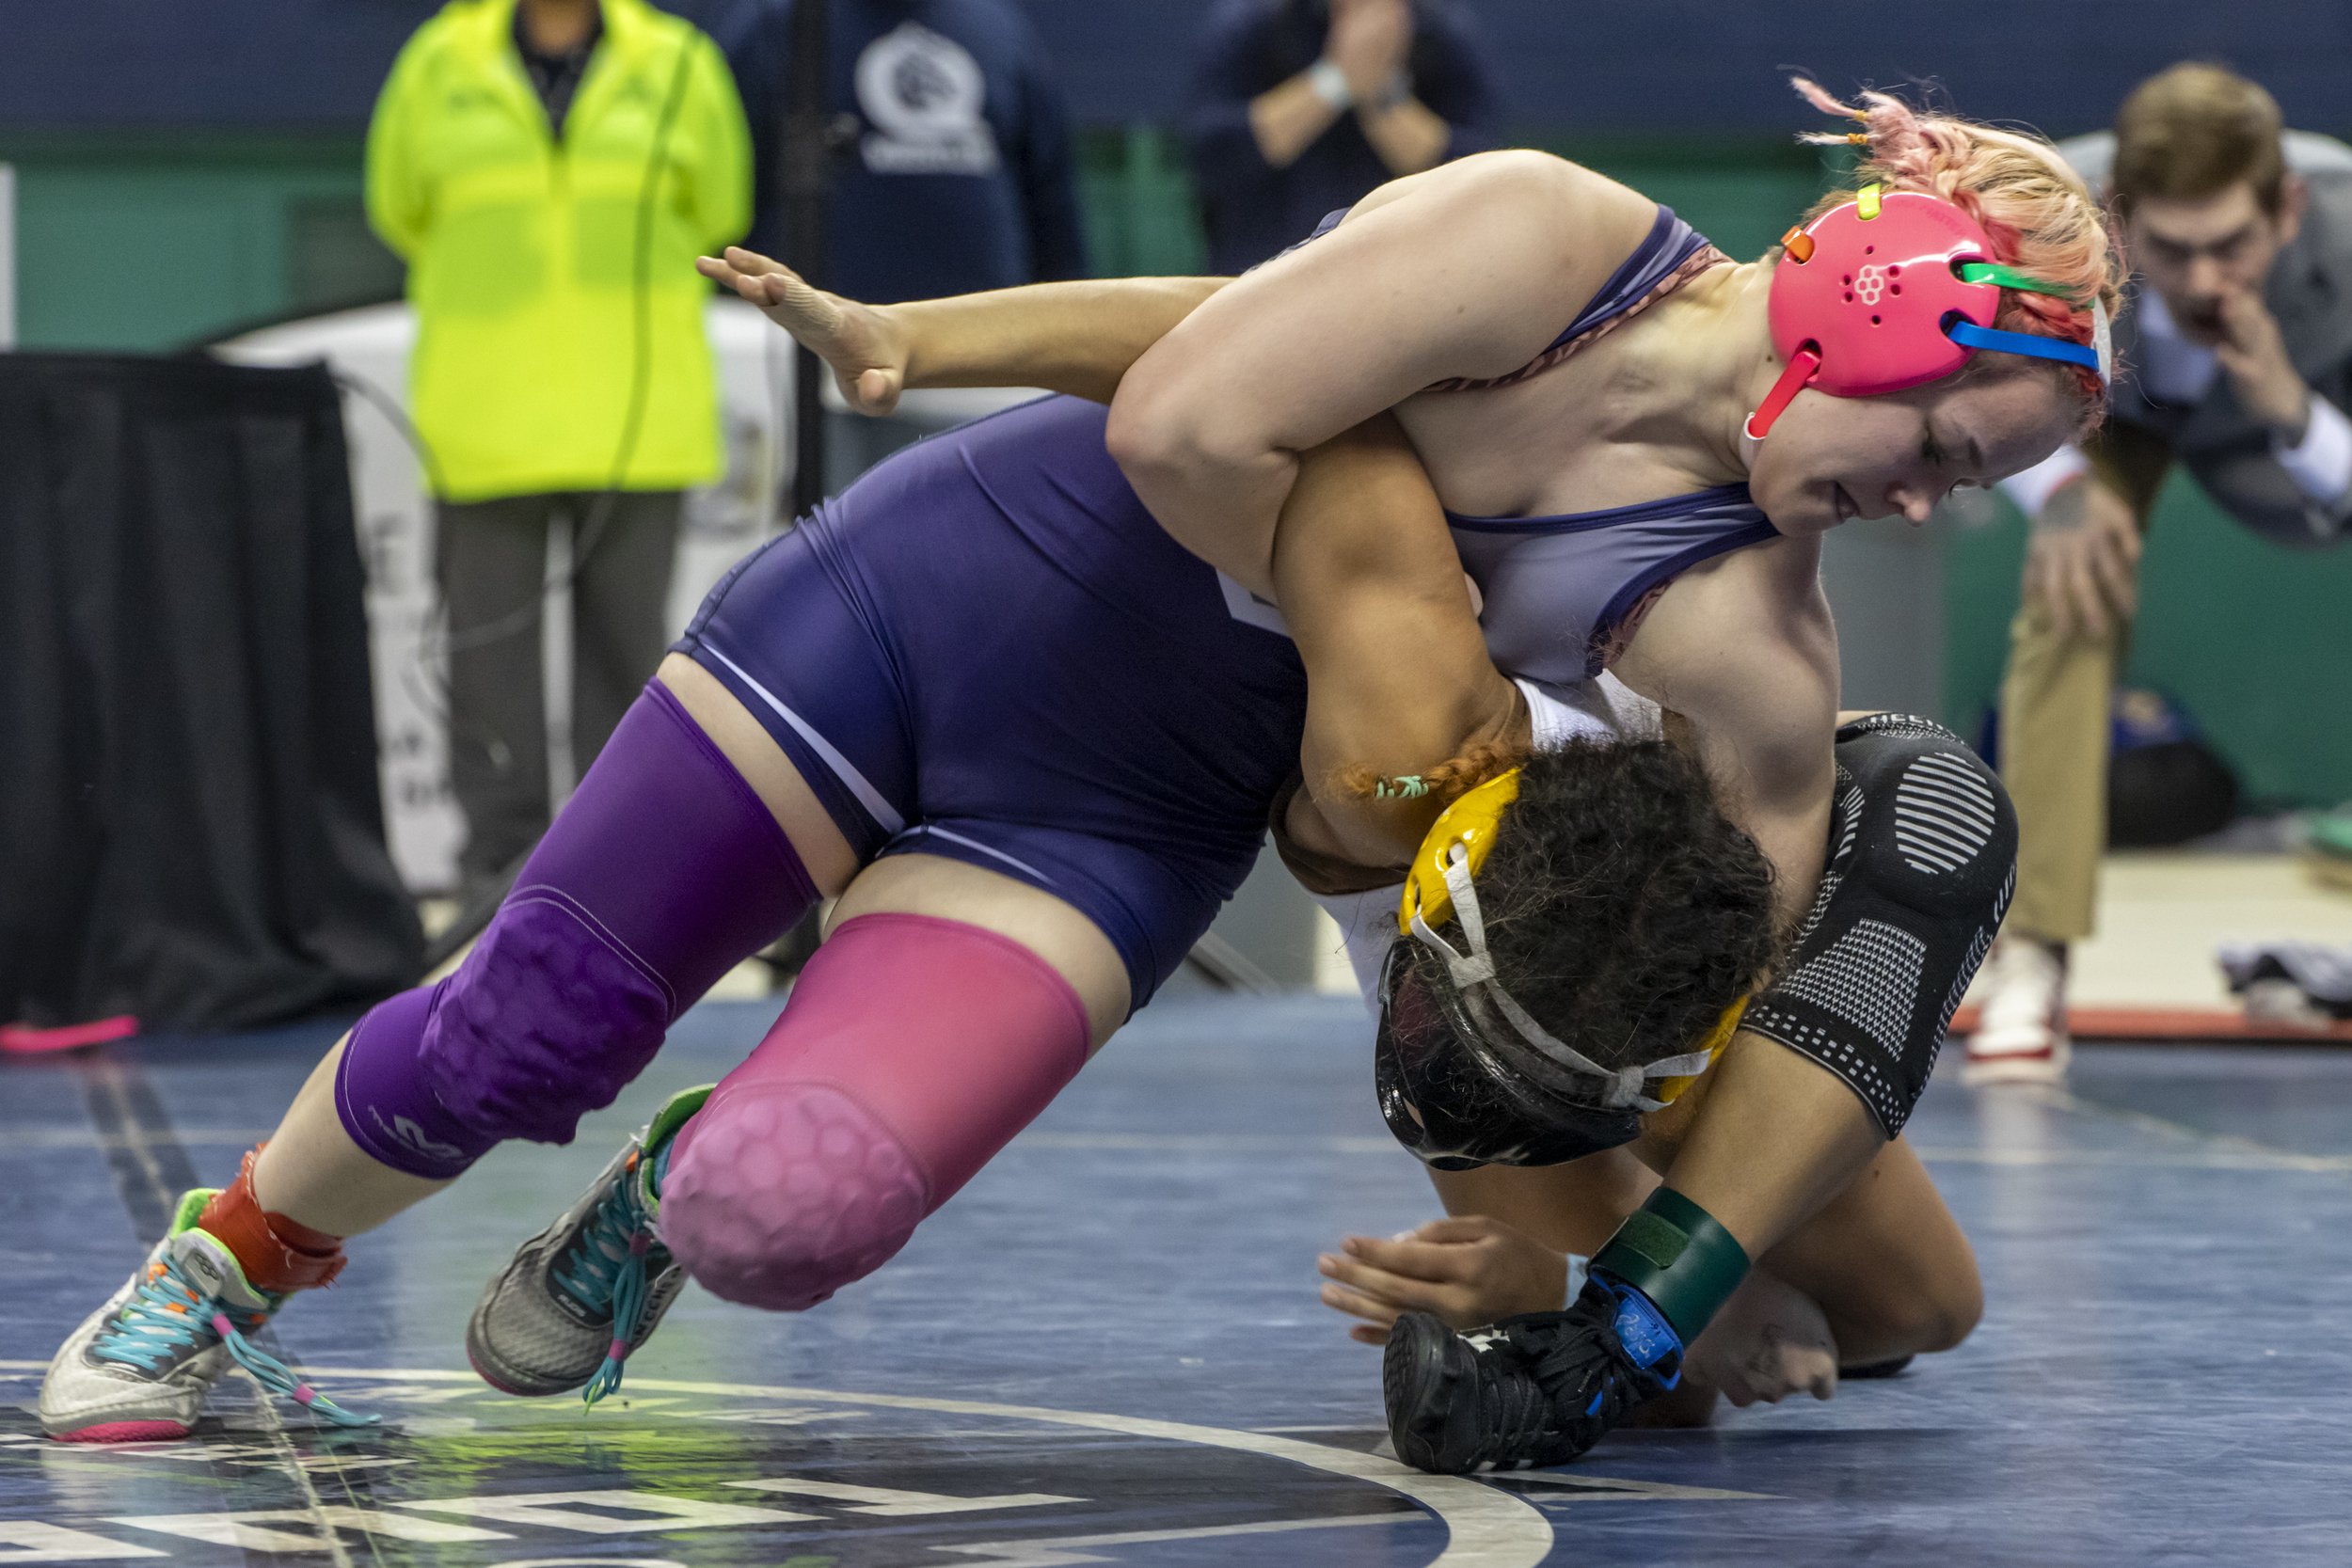  Wrestlers compete in the 2024 North Carolina High School Athletic Association’s first sanctioned women’s wrestling championship on Saturday, February 17, 2024 at the Greensboro Coliseum in Greensboro, NC. 